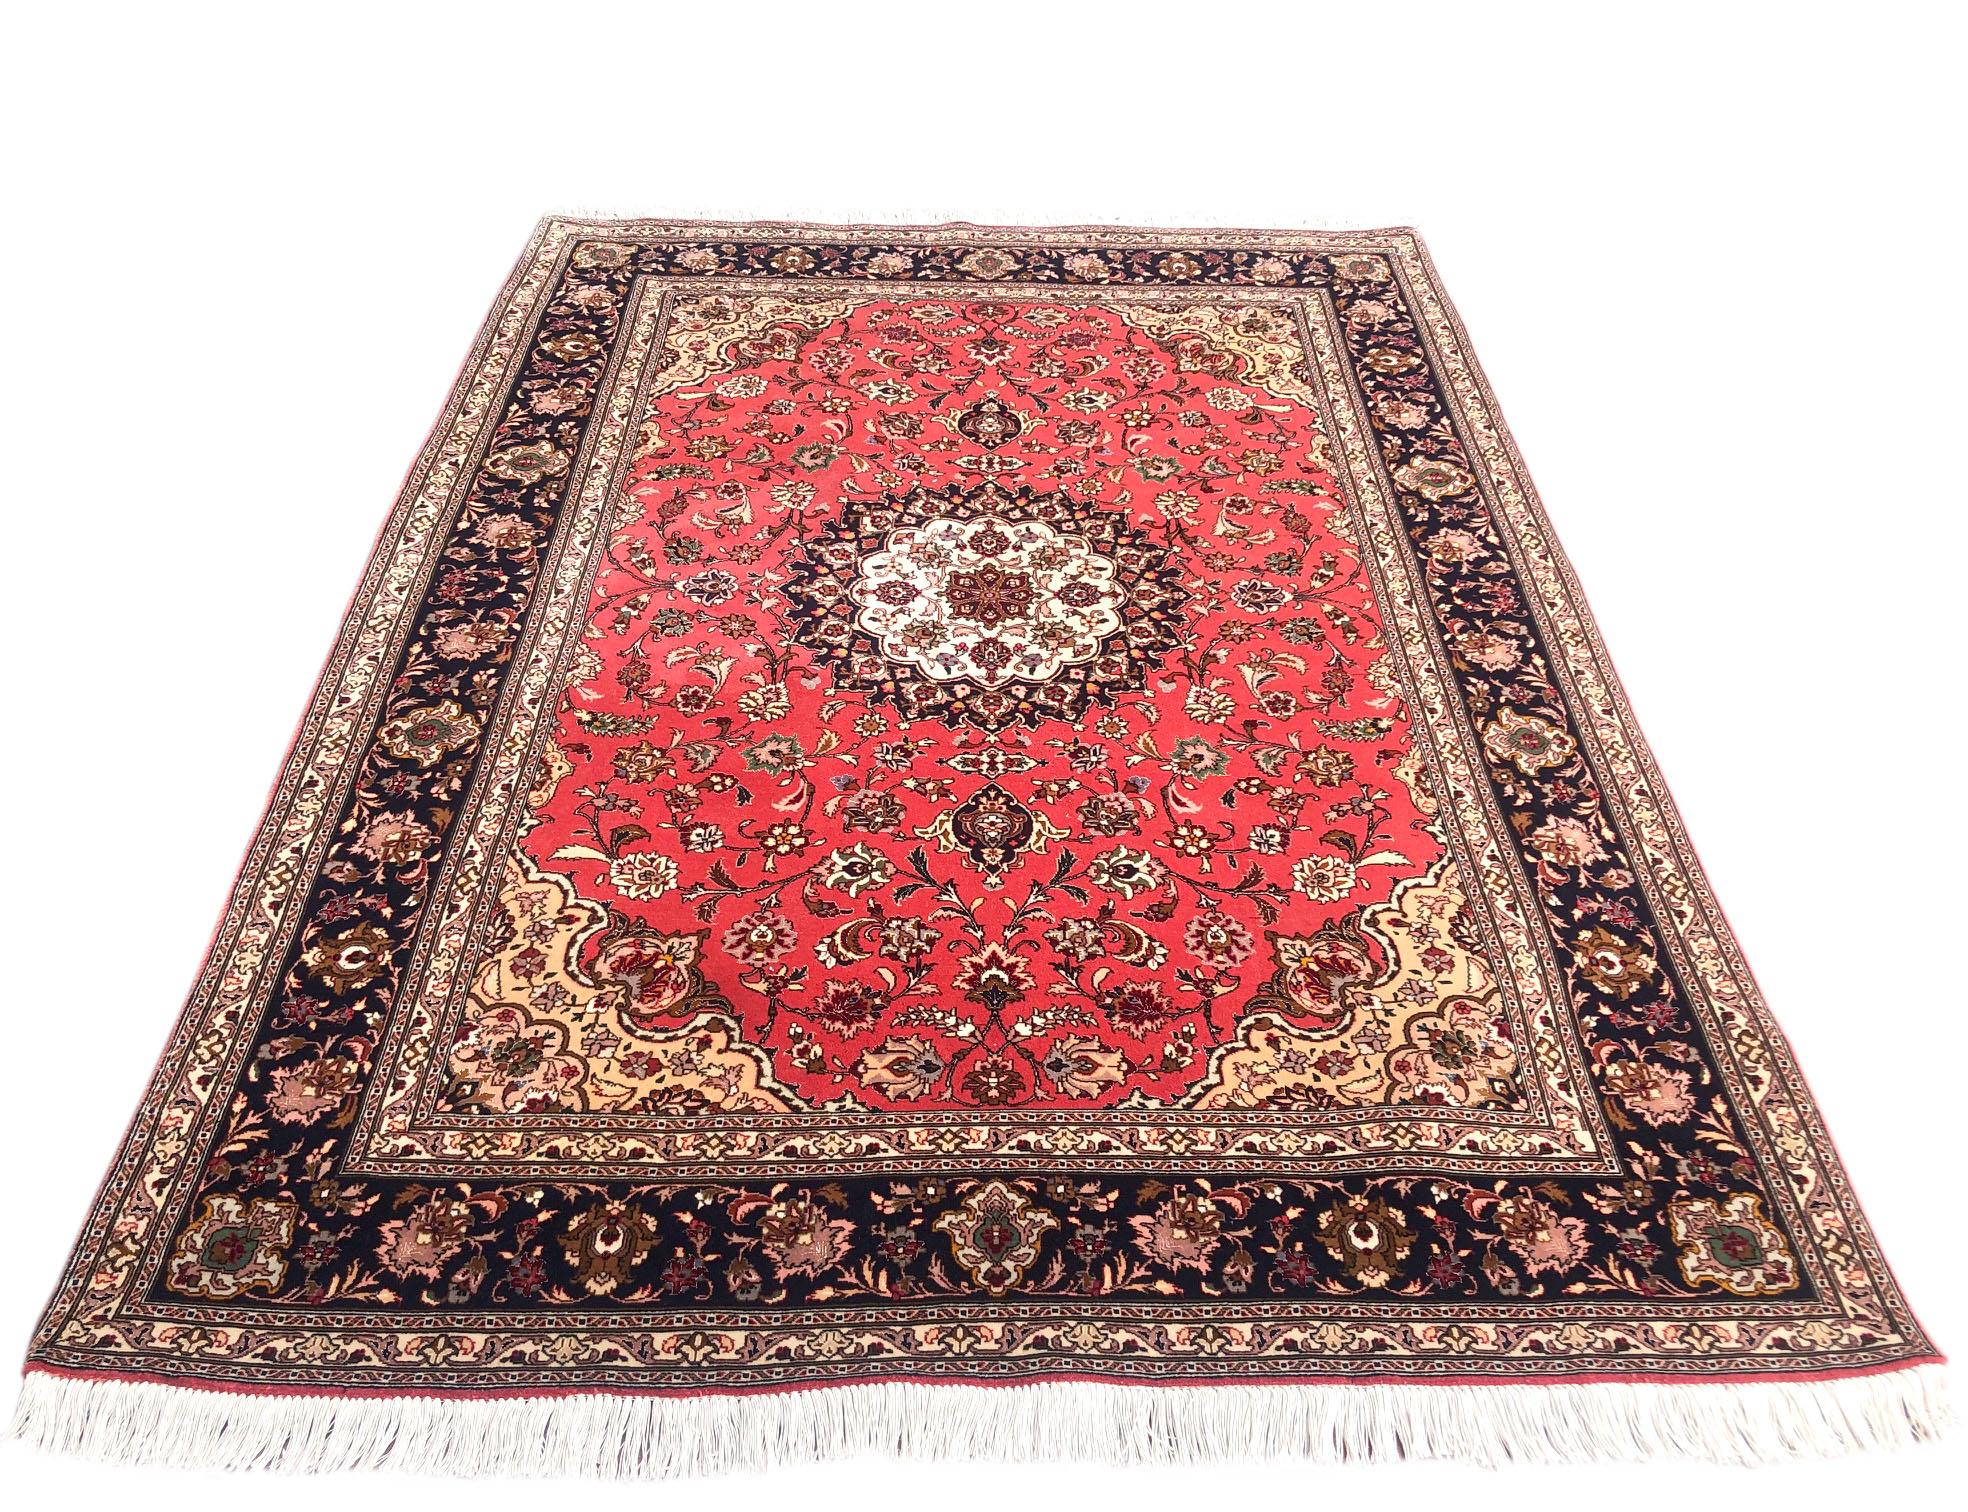 This rug is a hand knotted Persian Tabriz rug with a wool and silk pile on cotton foundation. Tabriz is one of the oldest rug weaving centers and makes a huge diversity of types of rugs. This rug features a floral medallion pattern and the design is